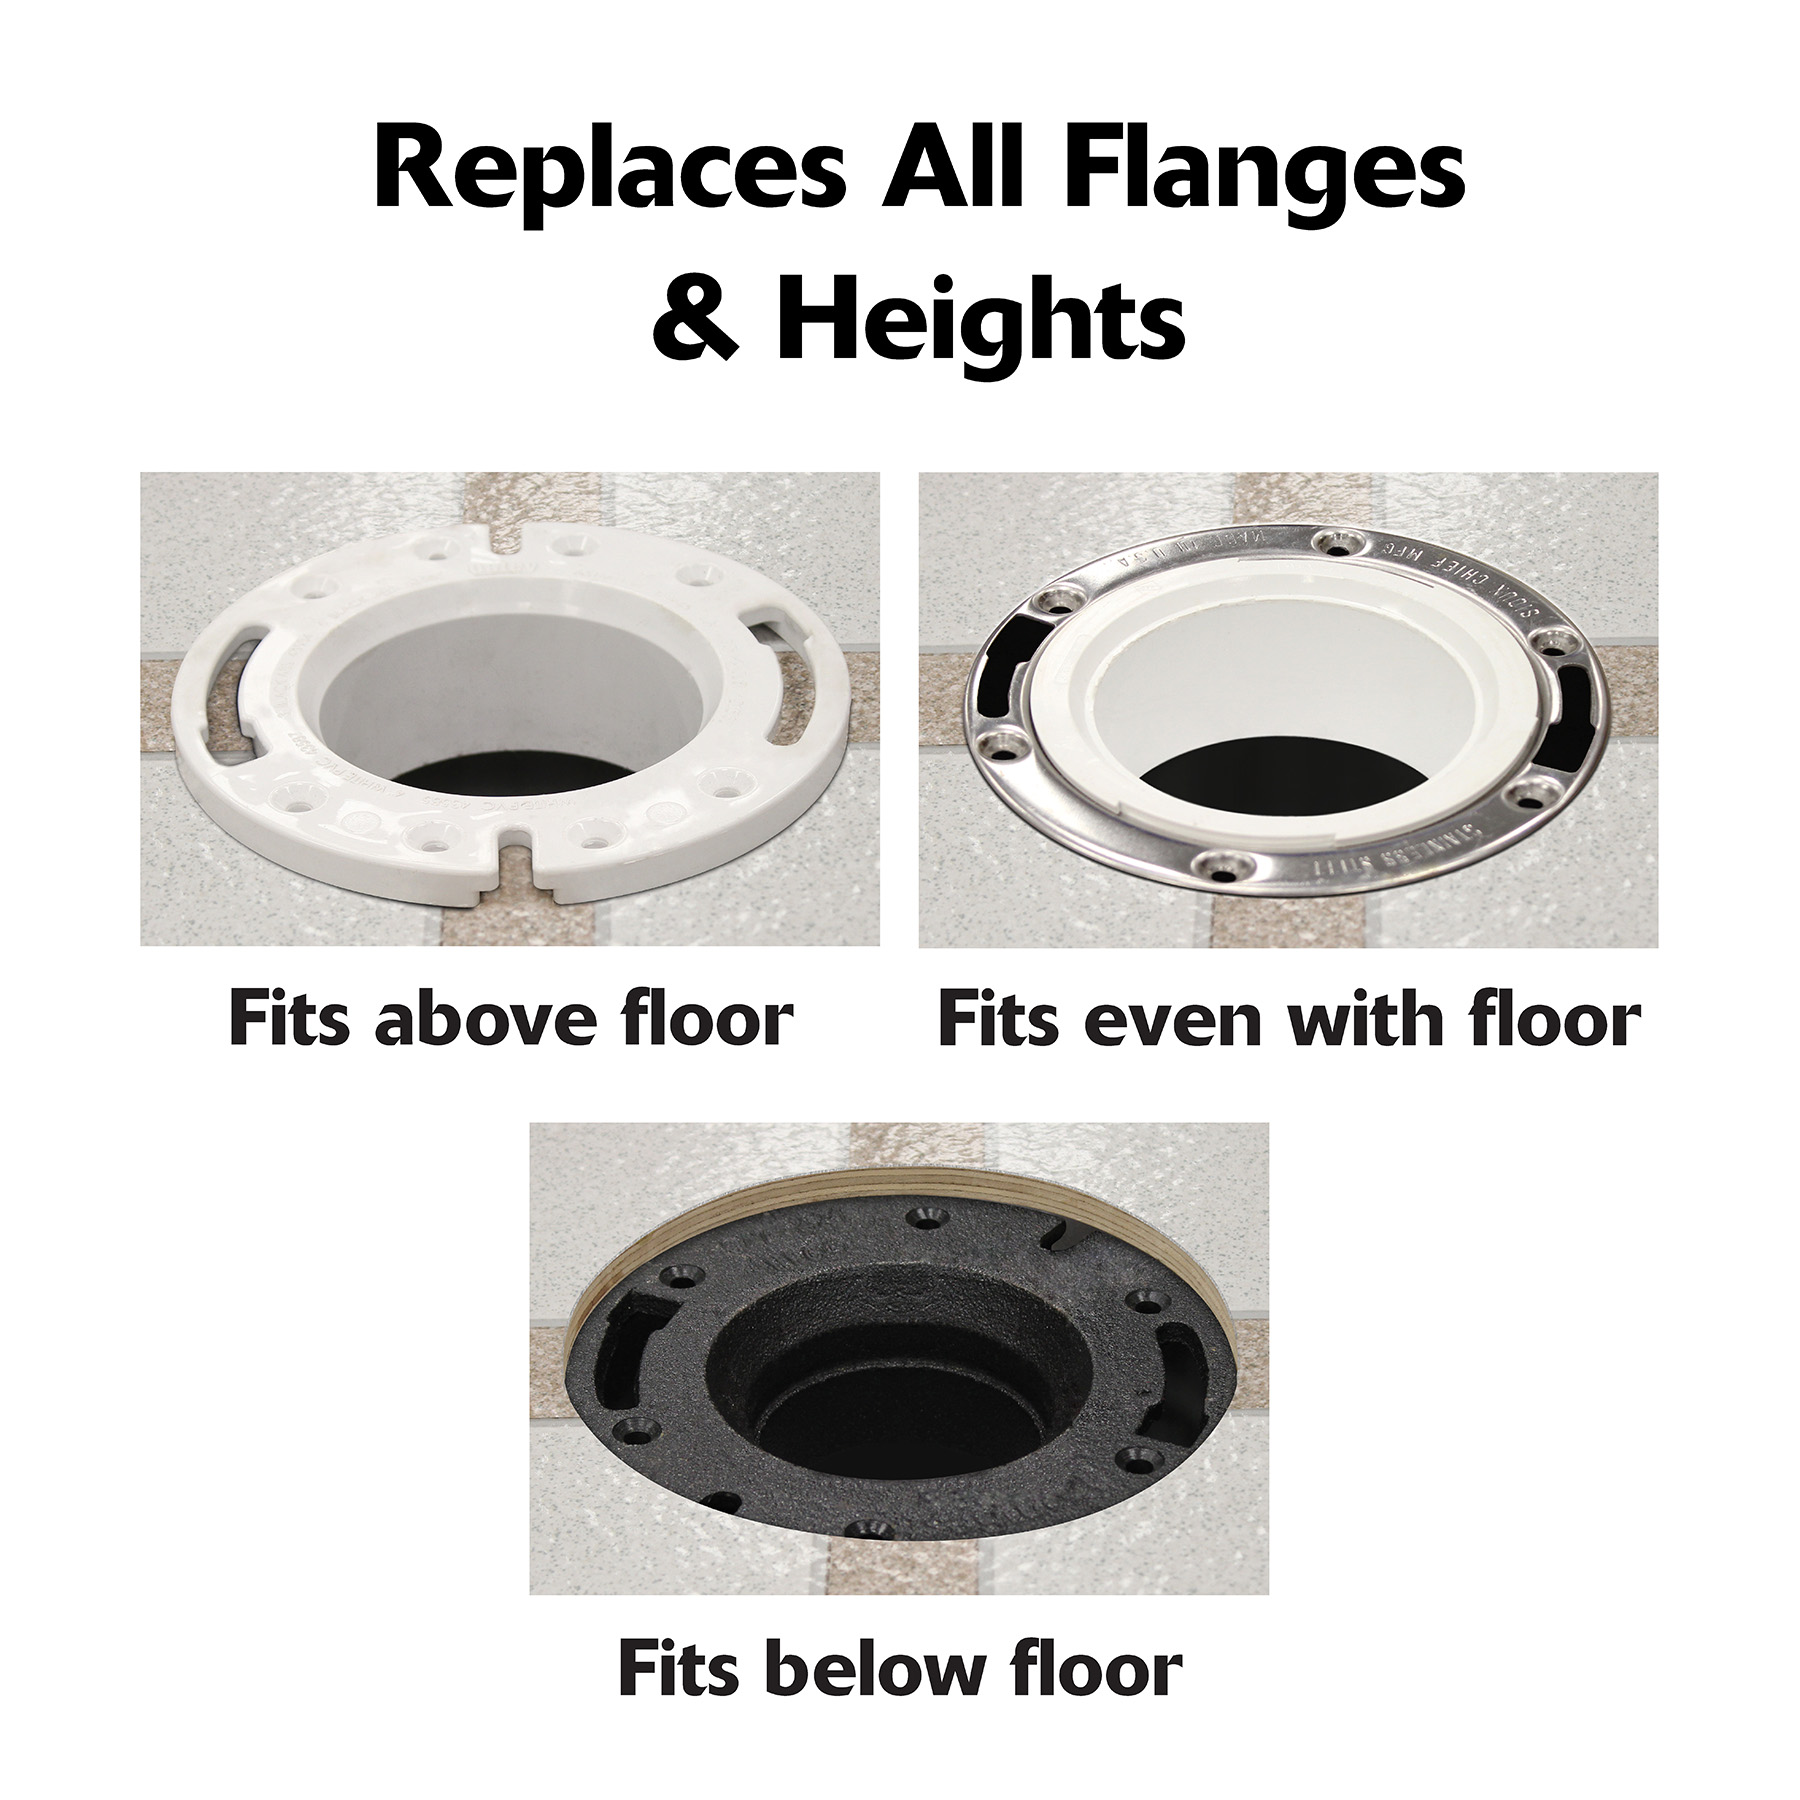 Wax Free Toilet Seal Replaces All Flanges and Heights